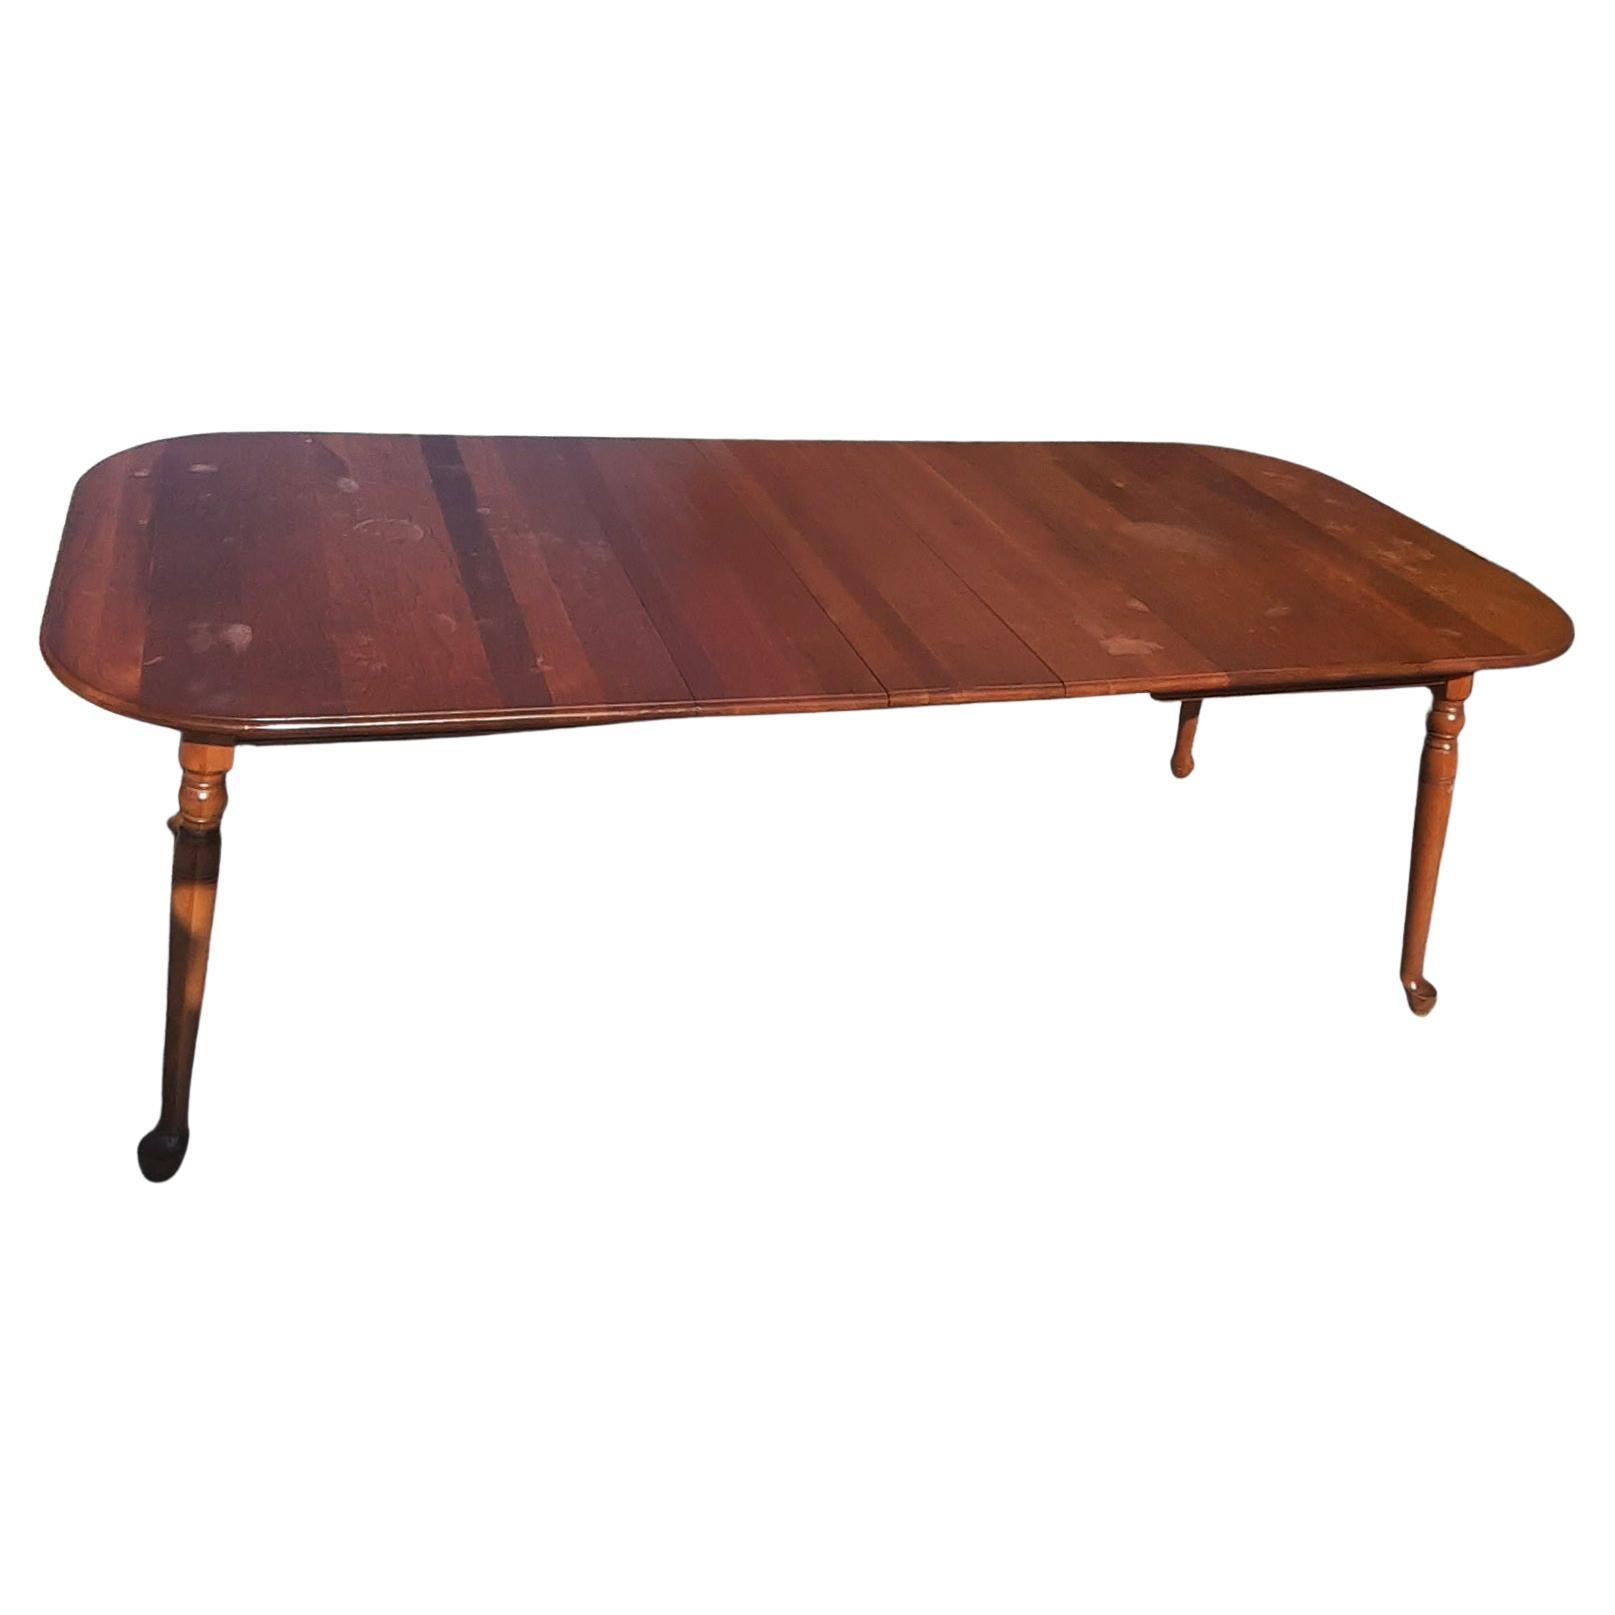 Pennsylvania house solid cherry walter of wabash slides dining table. Comes with 3 leaves of 10 inches each.
Overall dimensions are 90 inches in width, 40 inches in depth and 29.5 inches tall. Table without leaves is 60 inches wide by 40 inches in